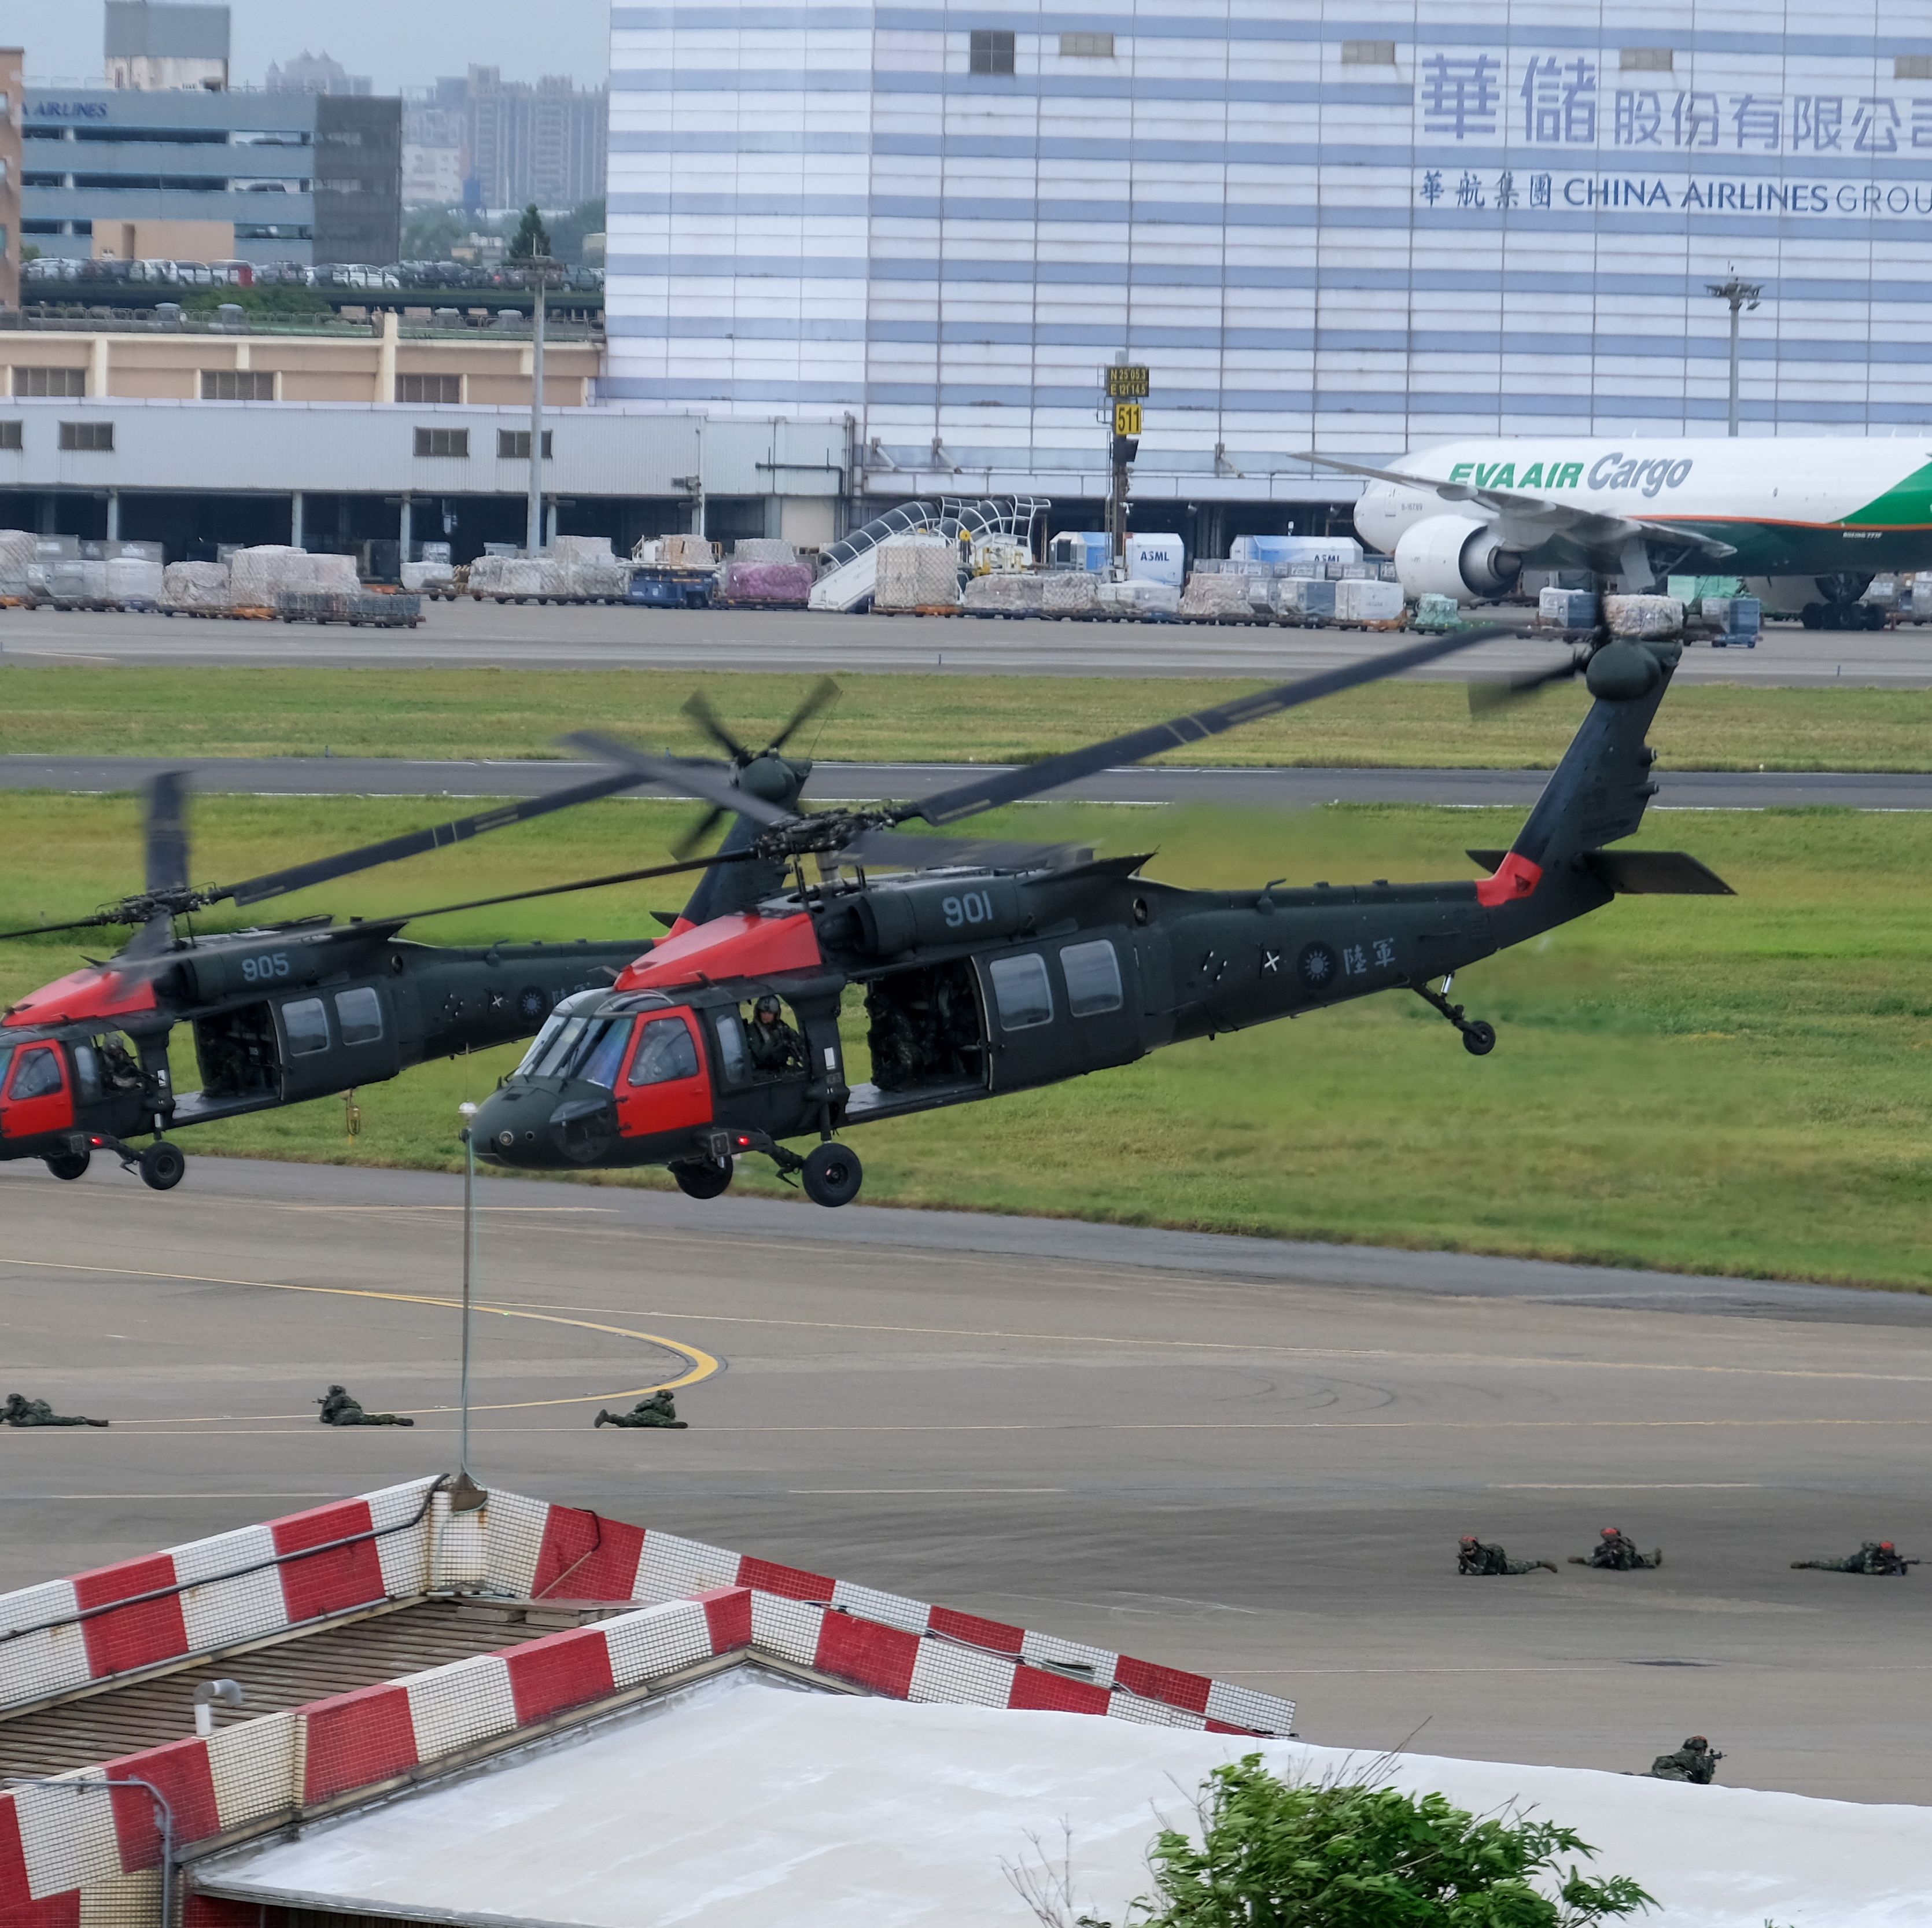 After What Happened In Ukraine, Taiwan Is Strengthening the Defense of Its Main Airport